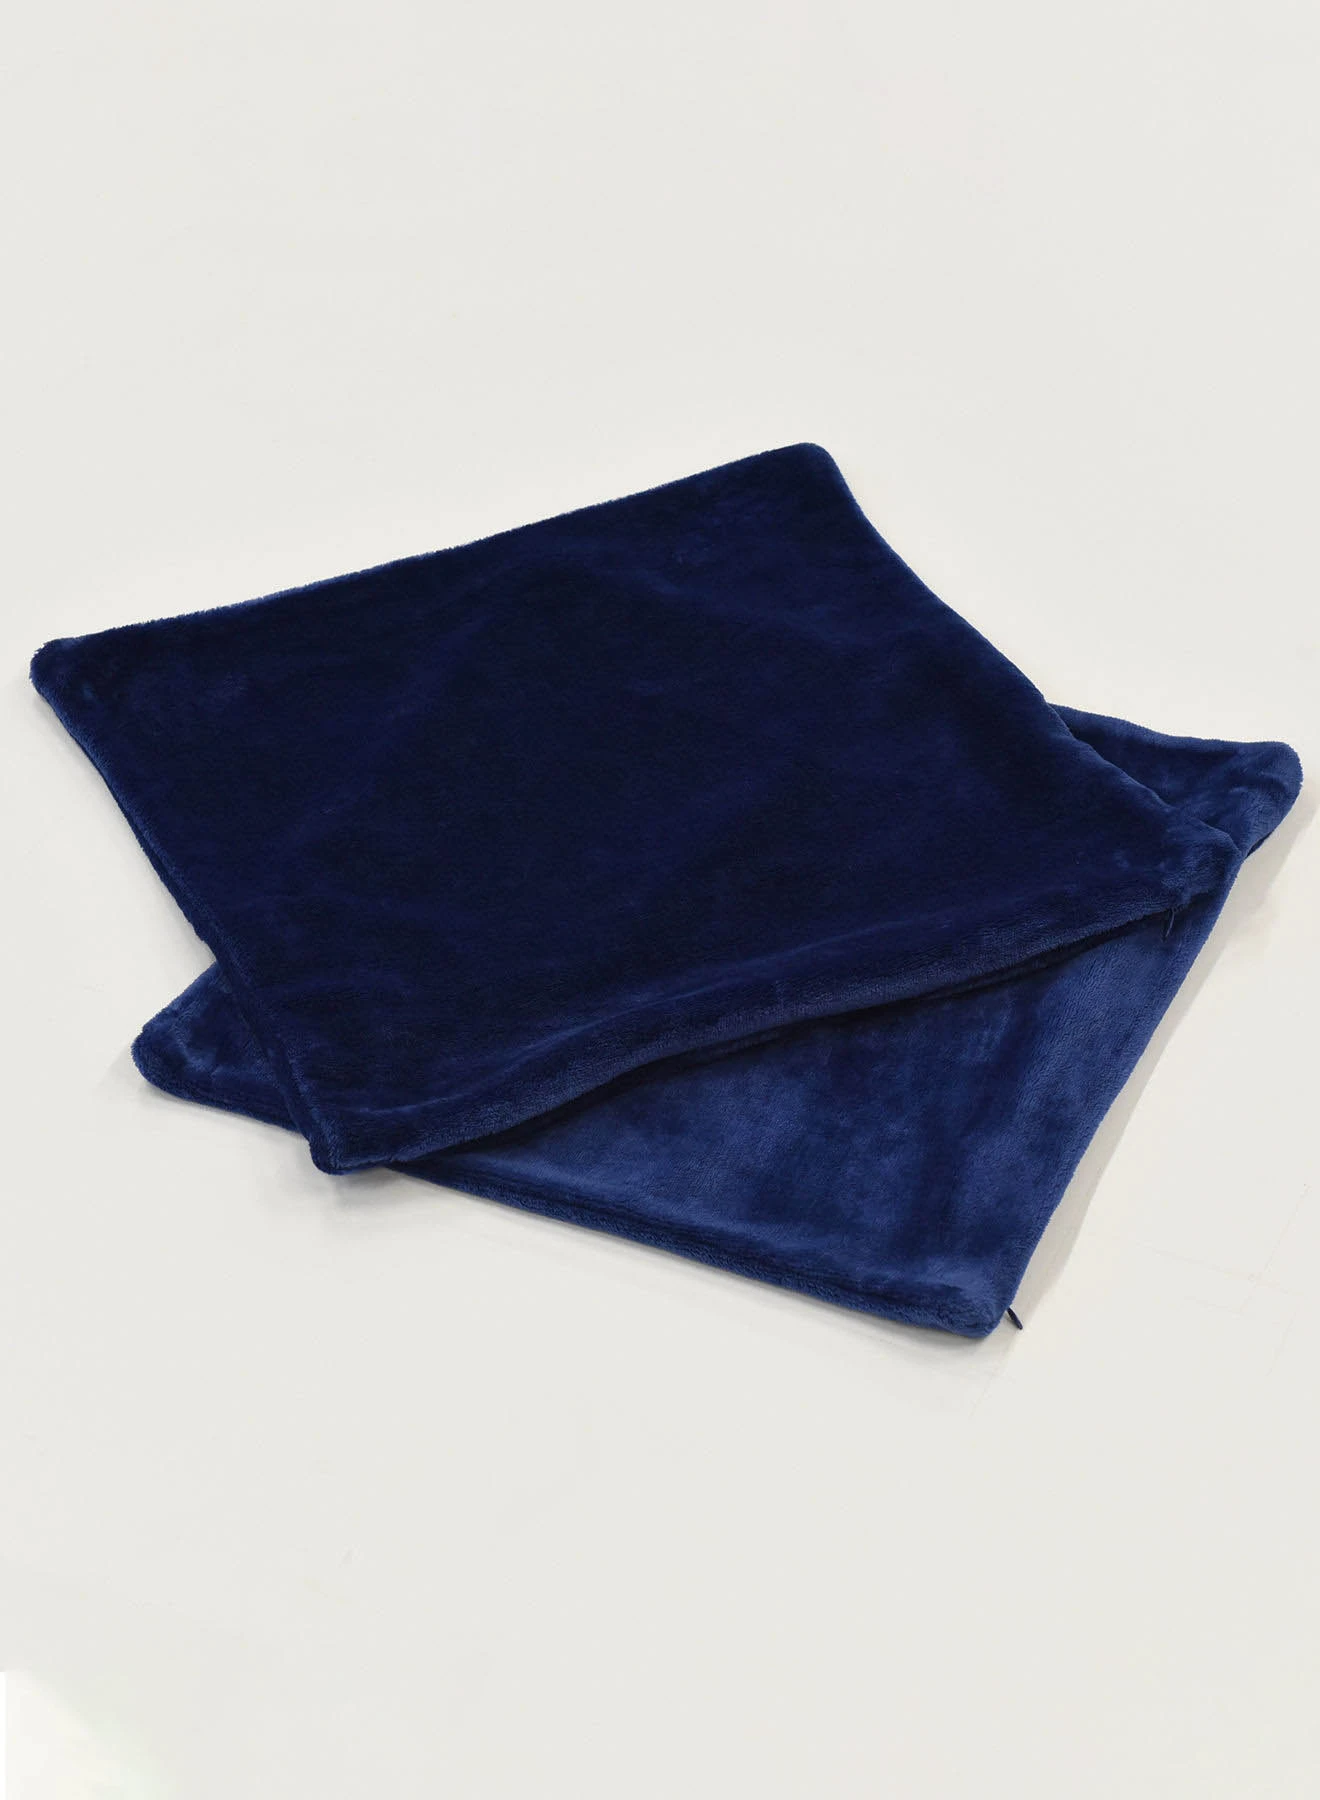 Amal Decorative Cushion Cover - Size 45X45 Cm Blue - 100% Polyester 2 Piece - Bedroom Or Living Room Decoration